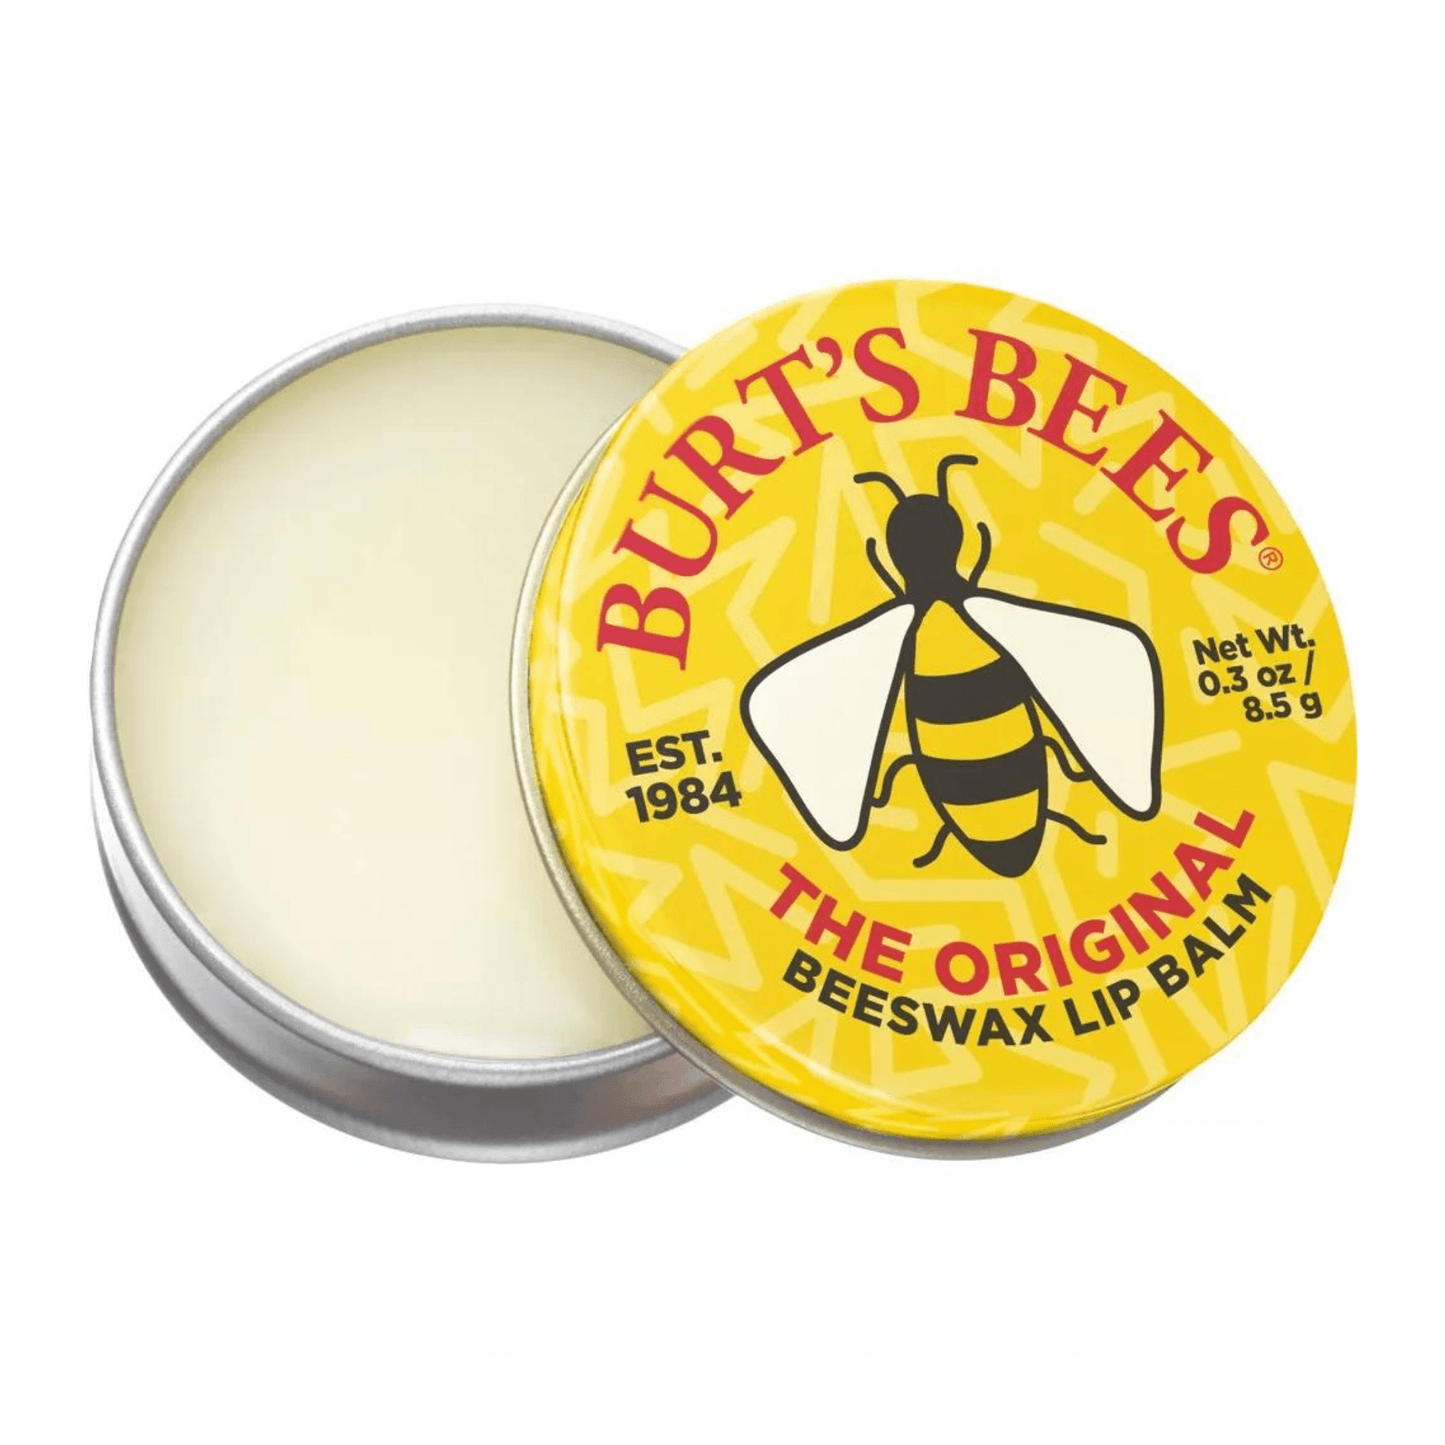 Primary Image of Beeswax Lip Balm